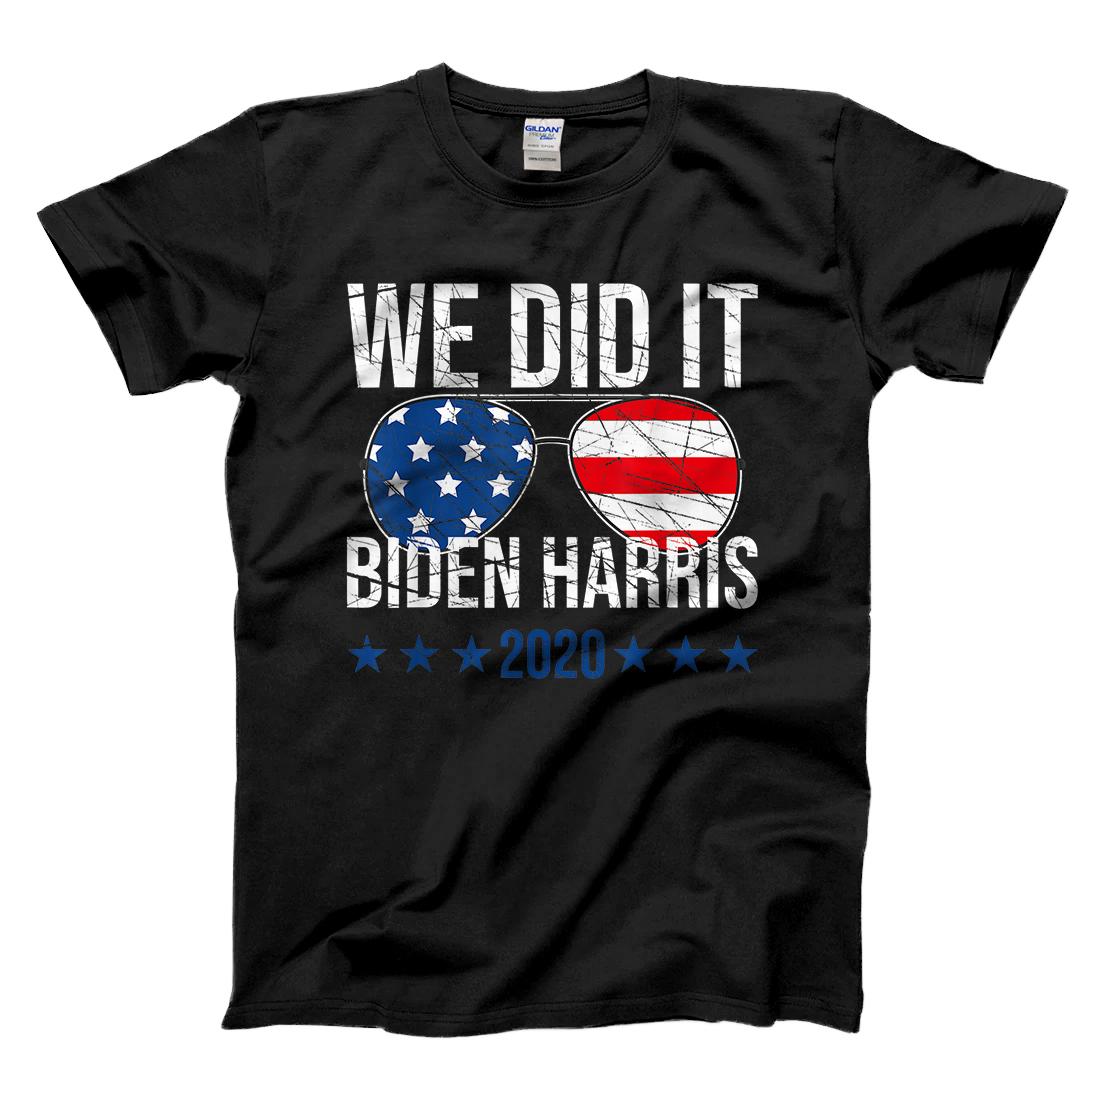 Personalized We Did It, Biden Harris Presidential Election 2020 Victory T-Shirt